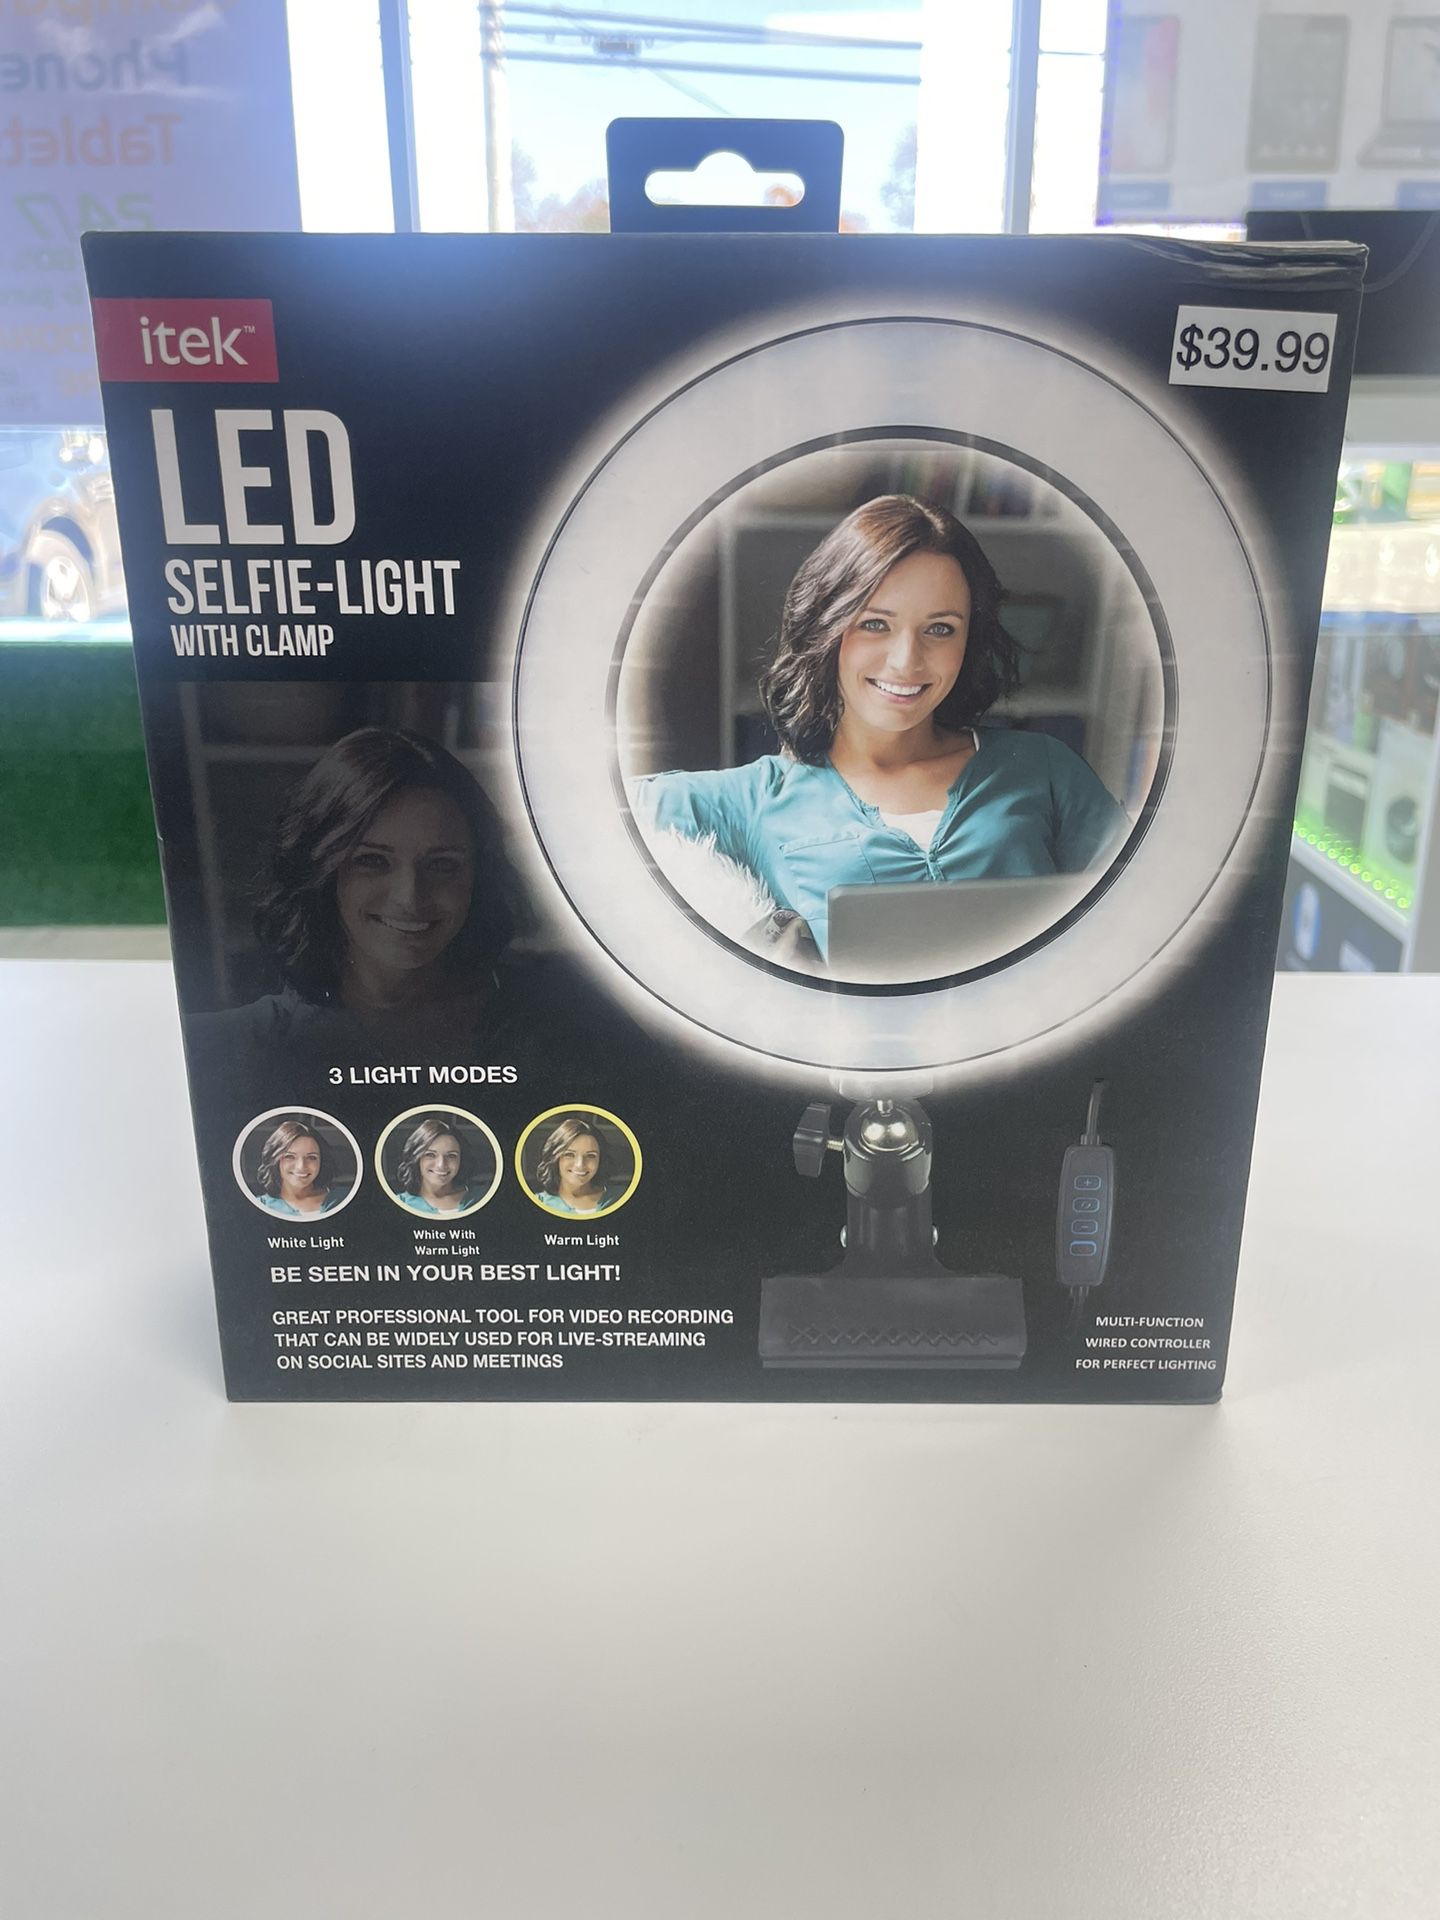 LED Selfie-Light With Clamp